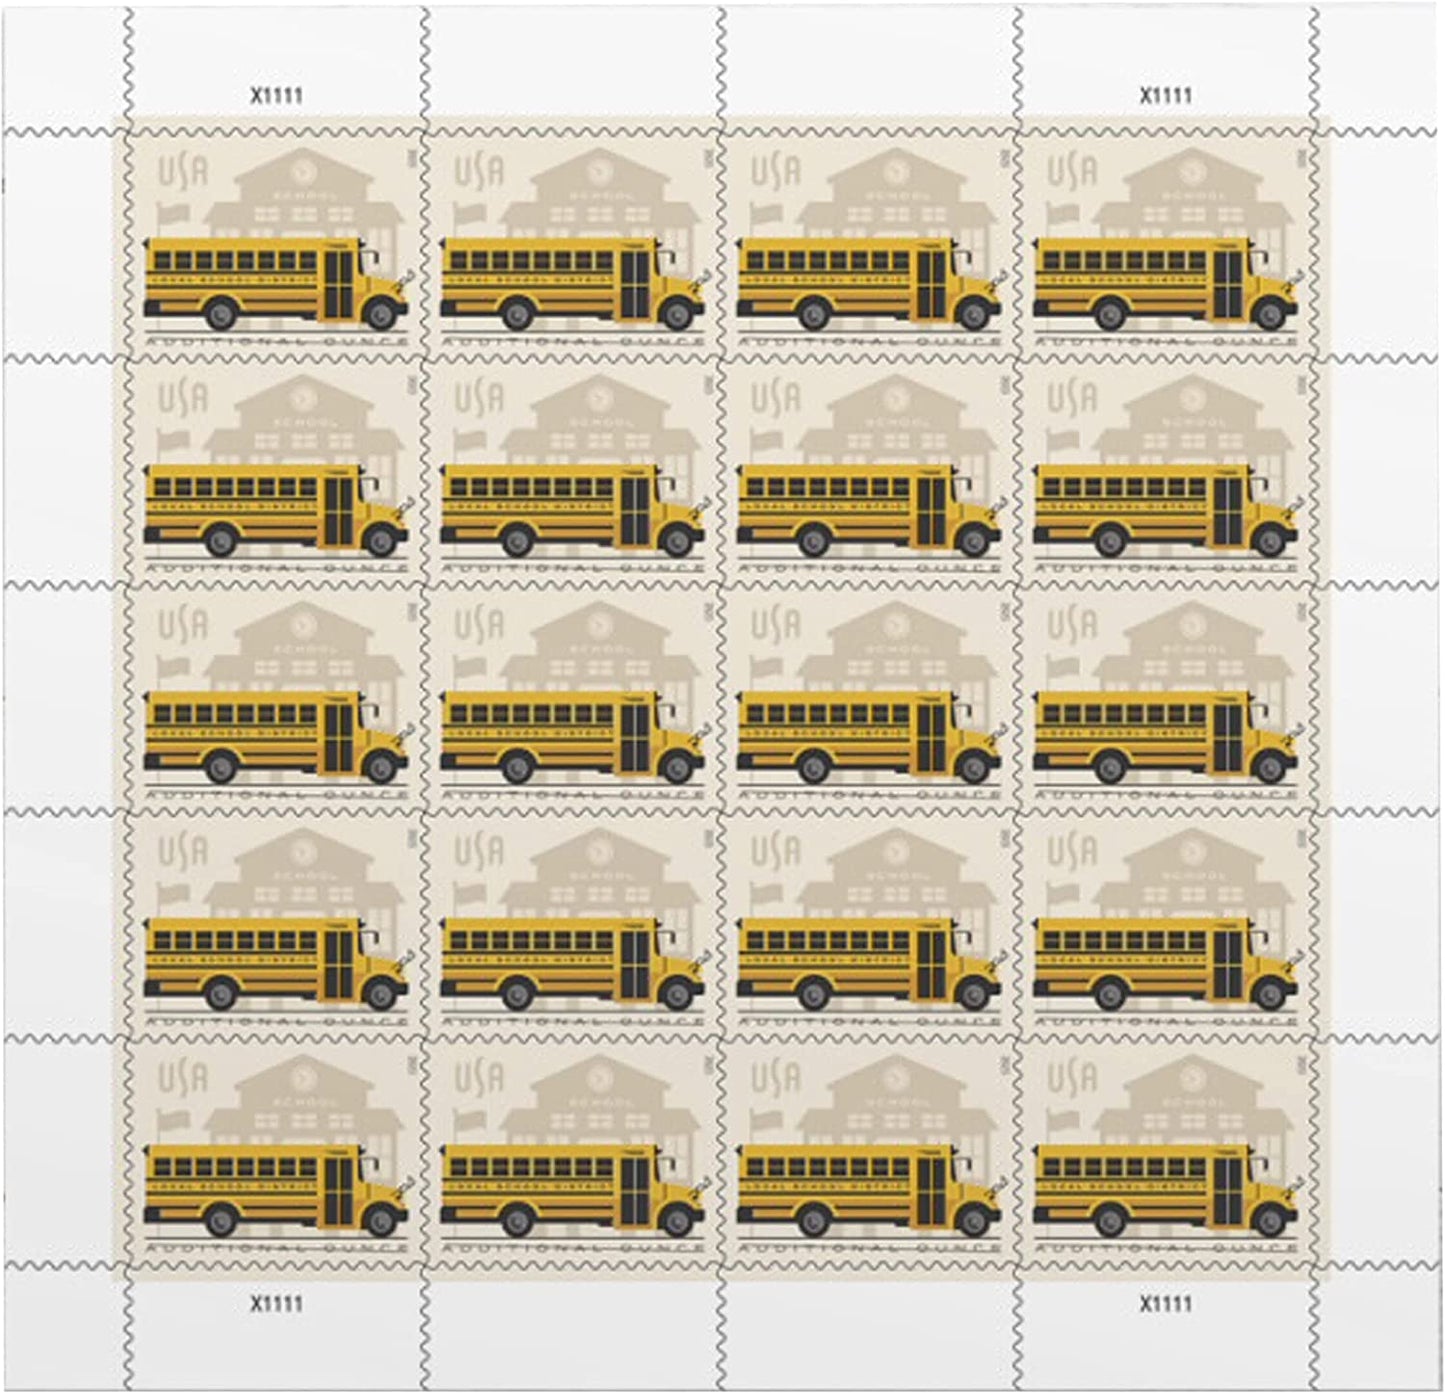 2023 US School Bus Additional Ounce Postage Stamps 1 Coil of 100